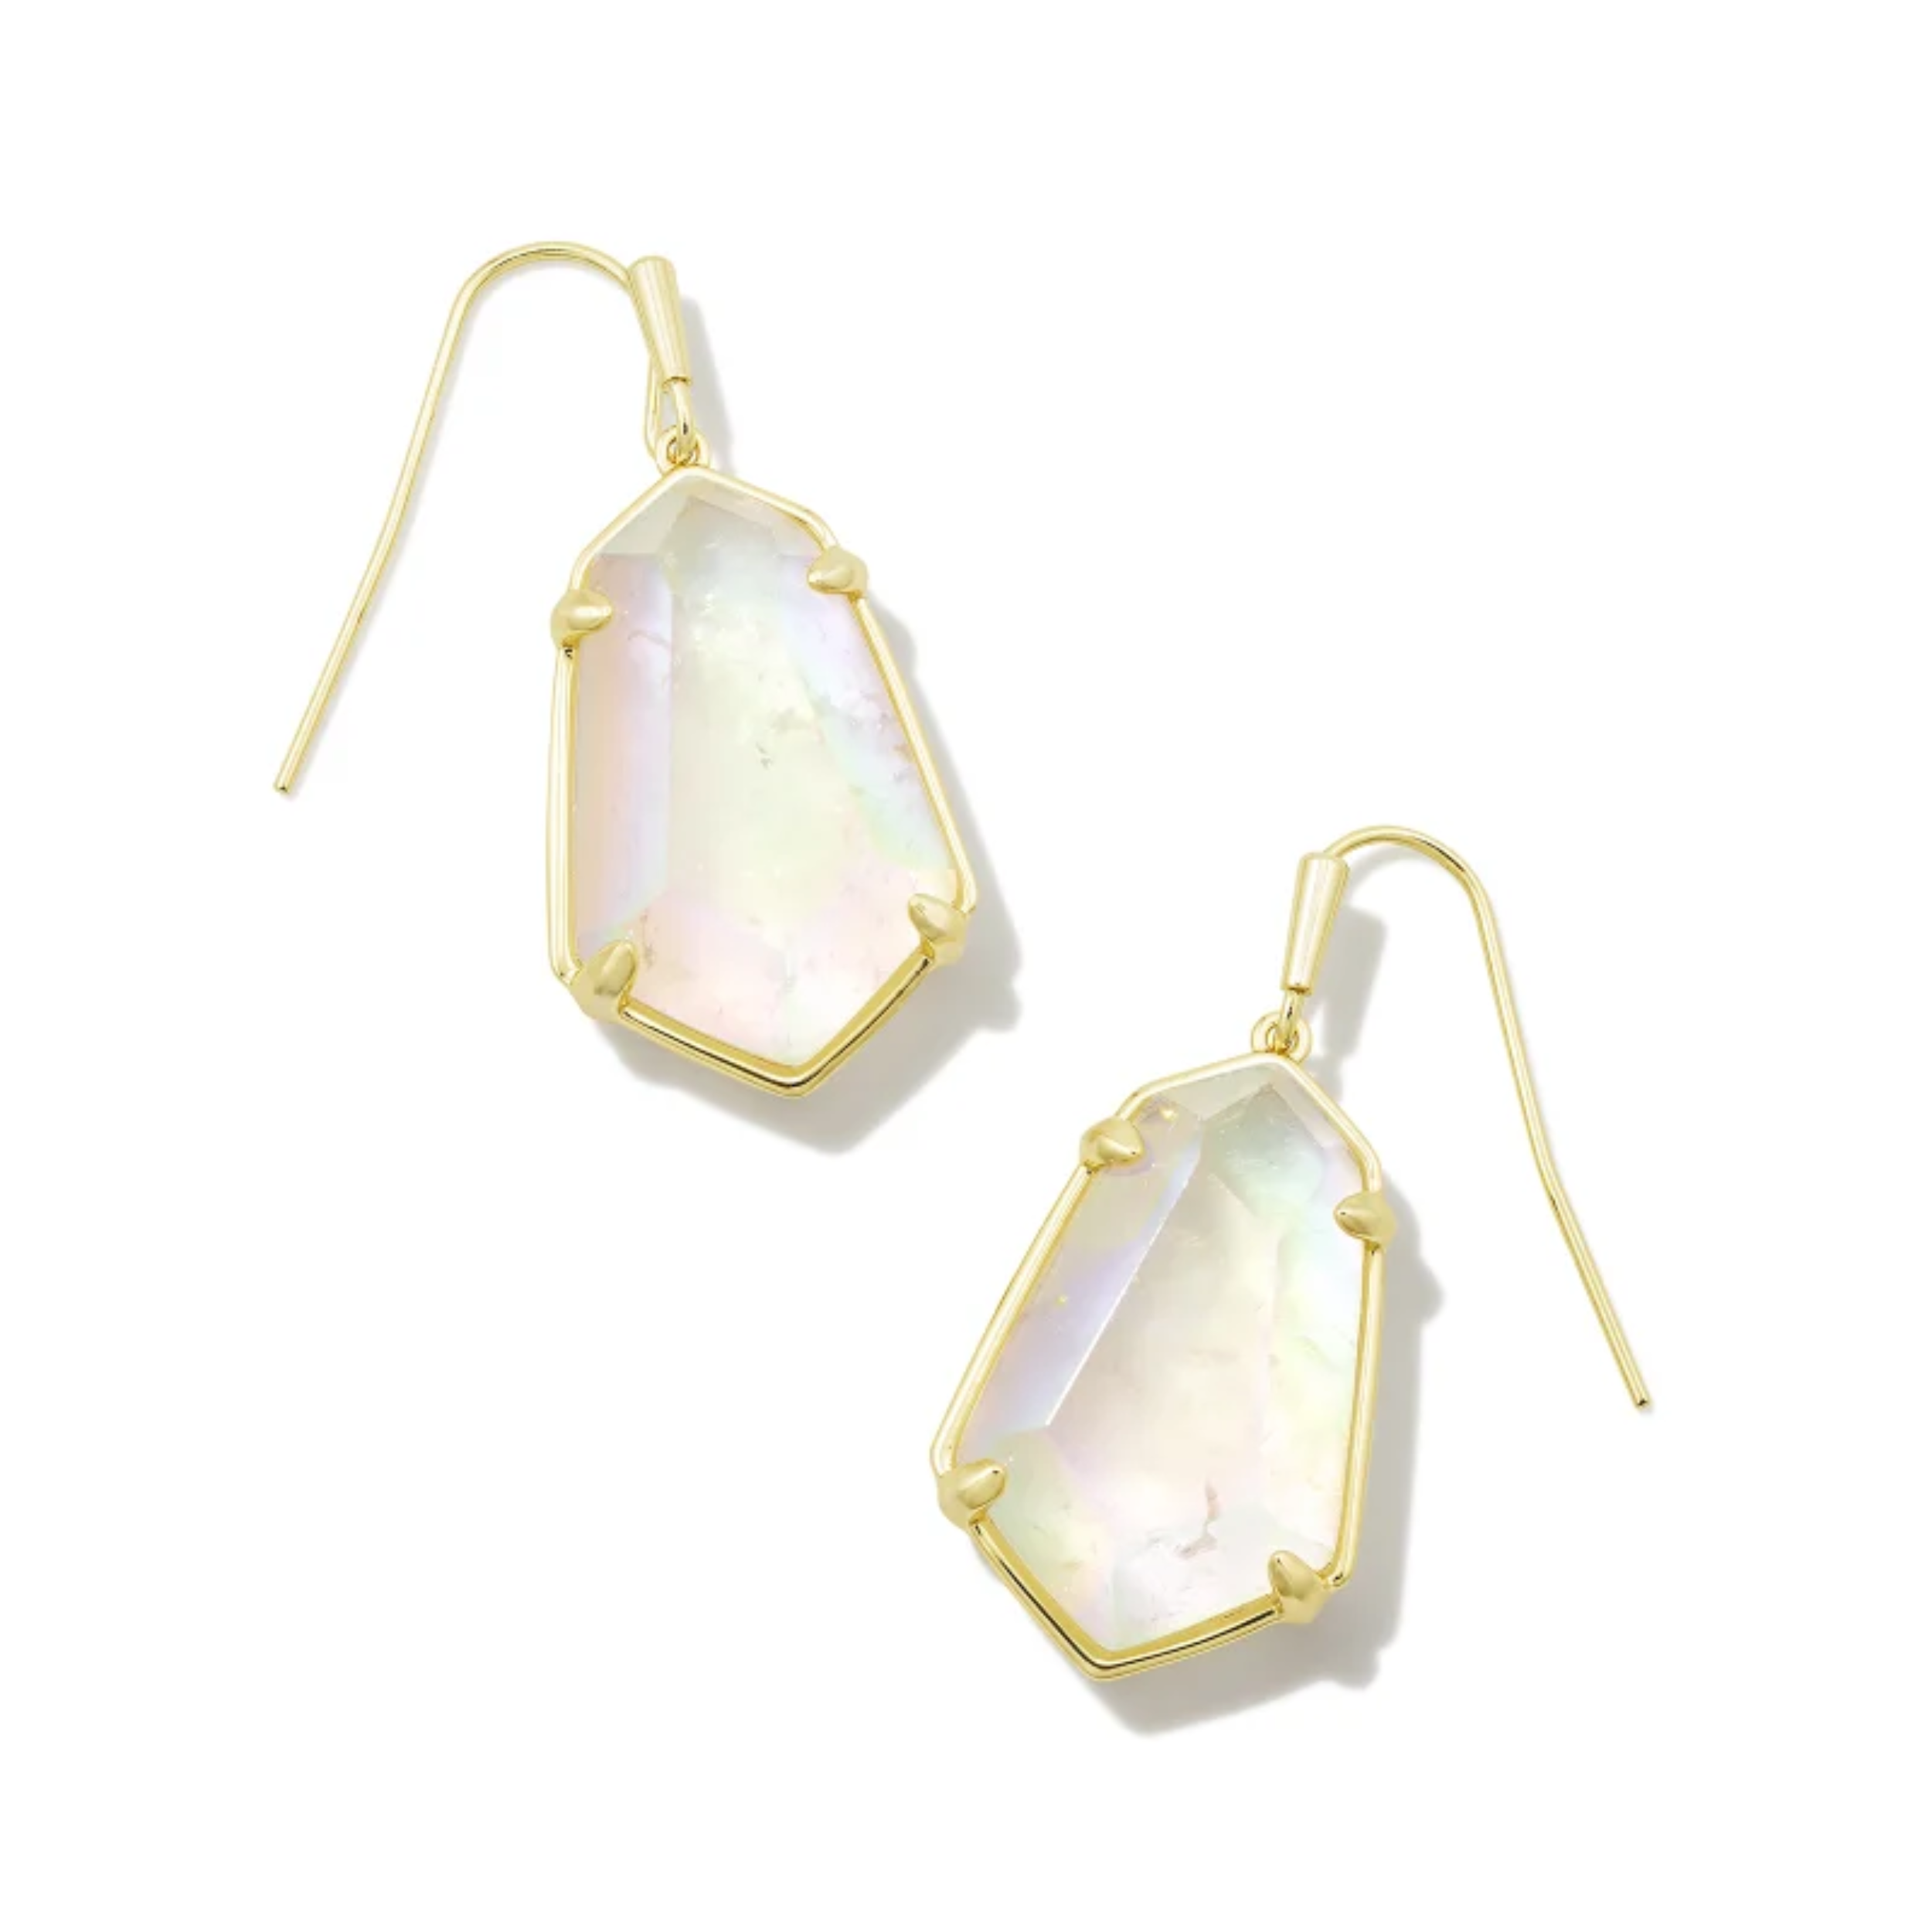 These Alexandria Gold Drop earrings in Iridescent Clear rock Crystal by Kendra Scott are pictured on a white background.